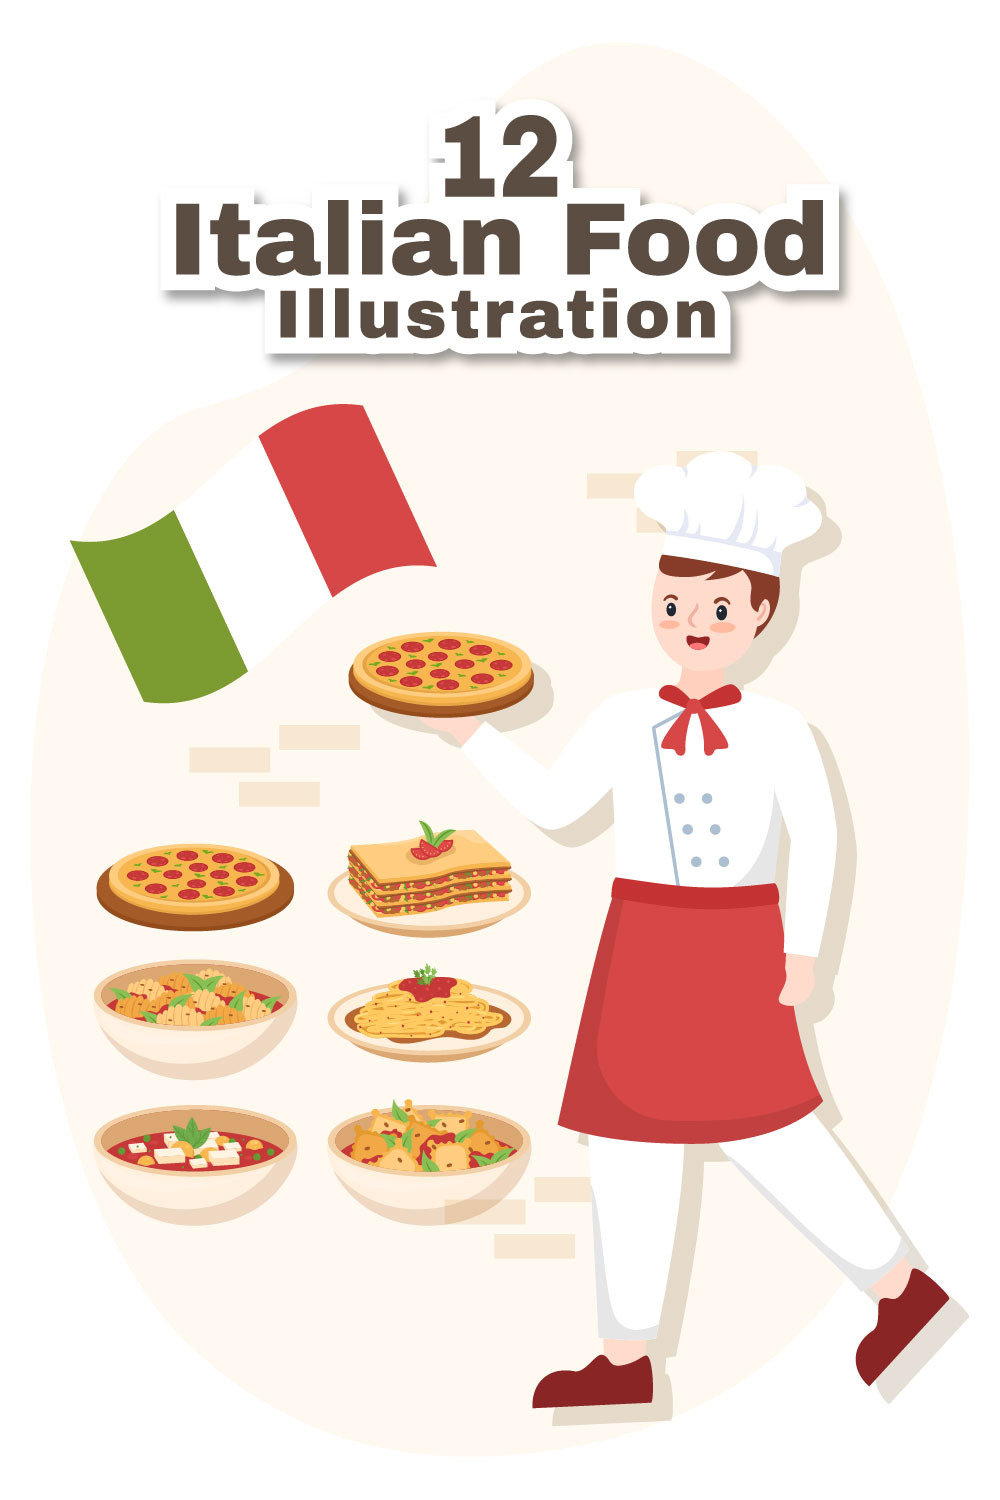 Enchanting image of an Italian chef with pizzas.